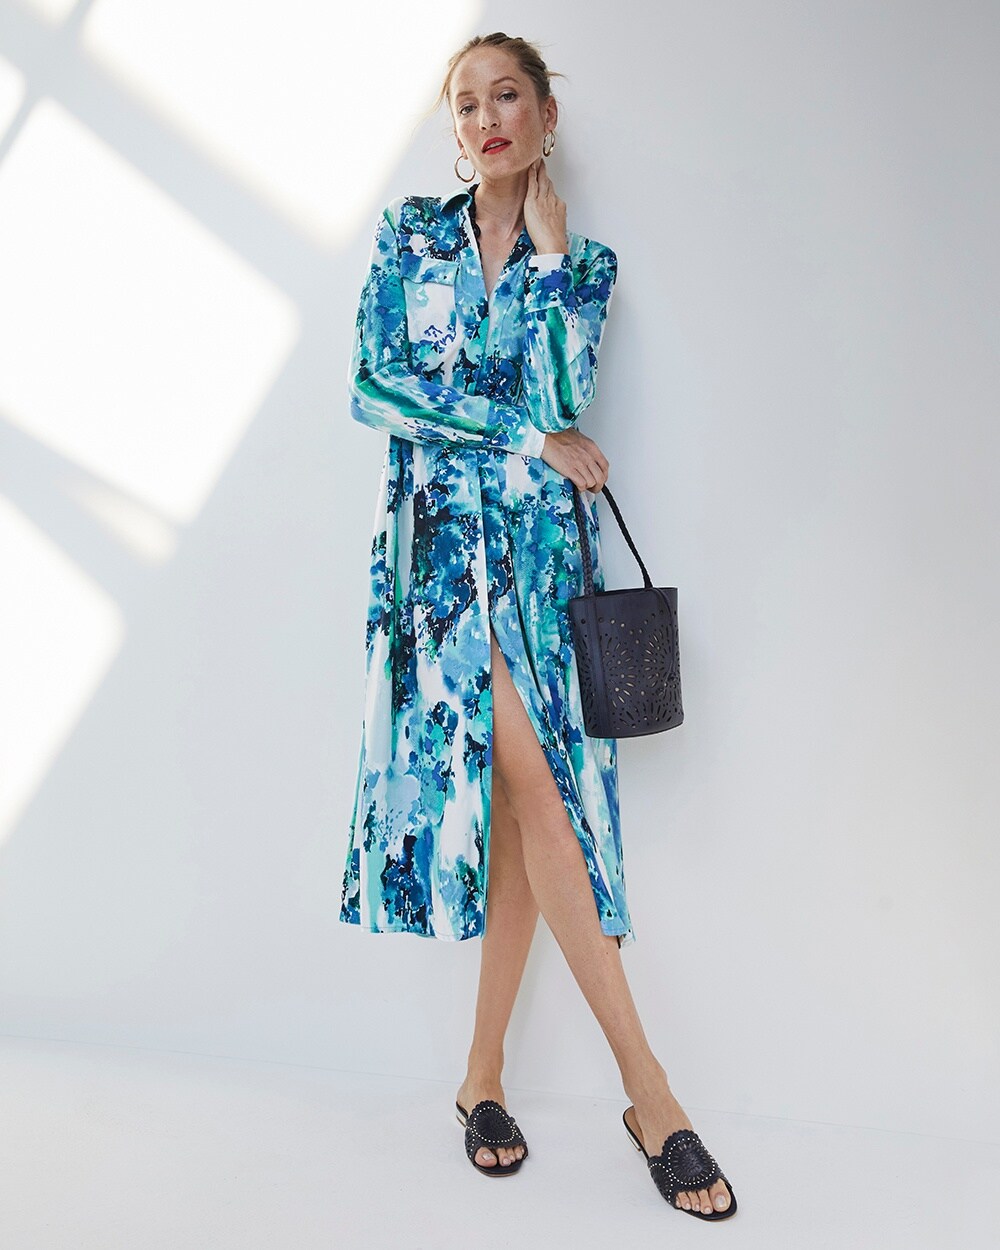 Waterscape Print Midi Shirt Dress video preview image, click to start video